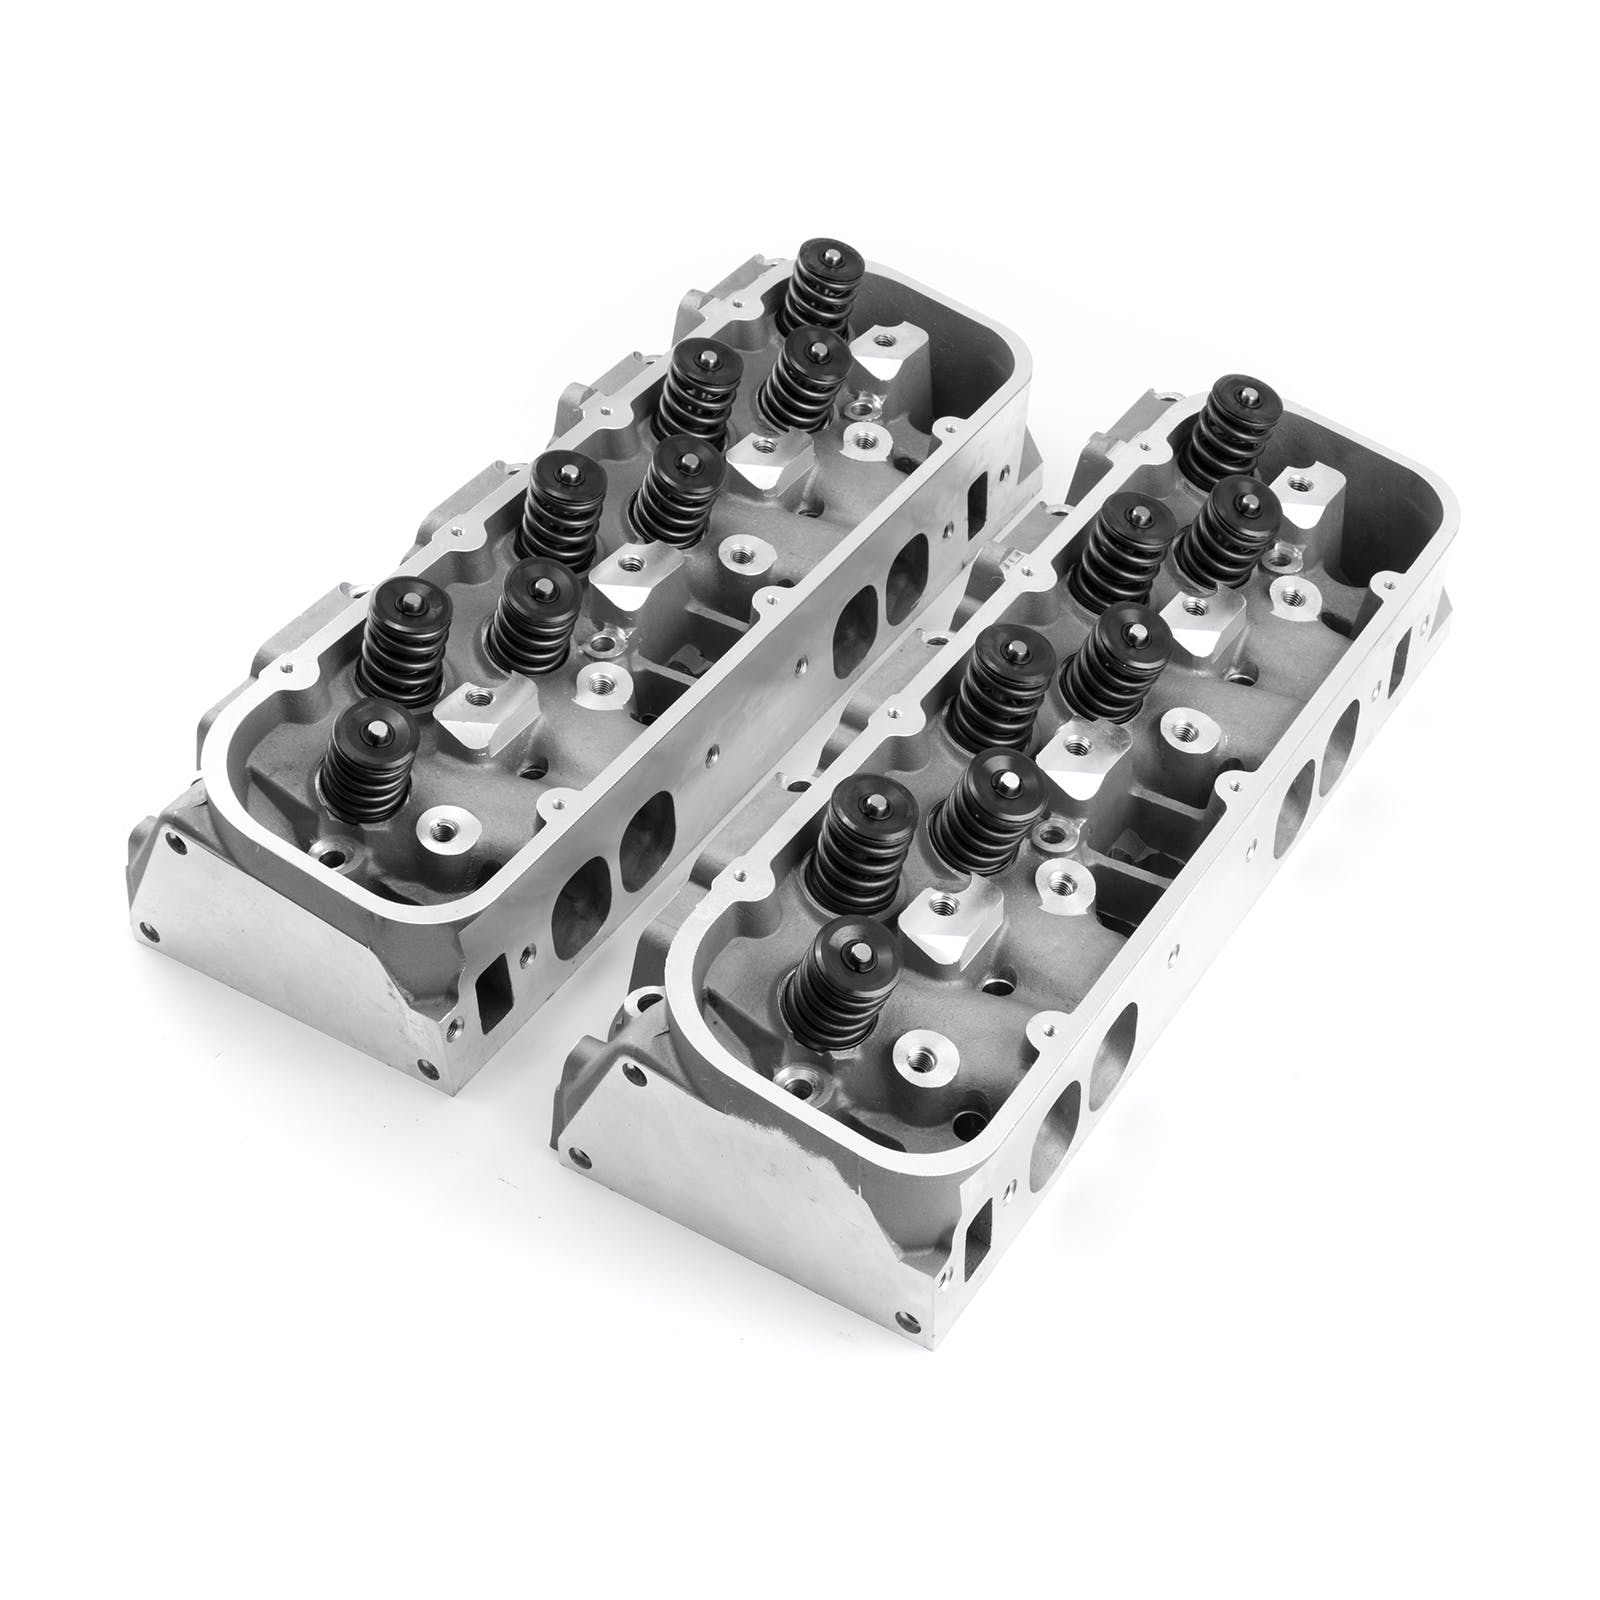 Speedmaster PCE281.2035 305cc 119cc Solid-FT Complete Aluminum Cylinder Heads